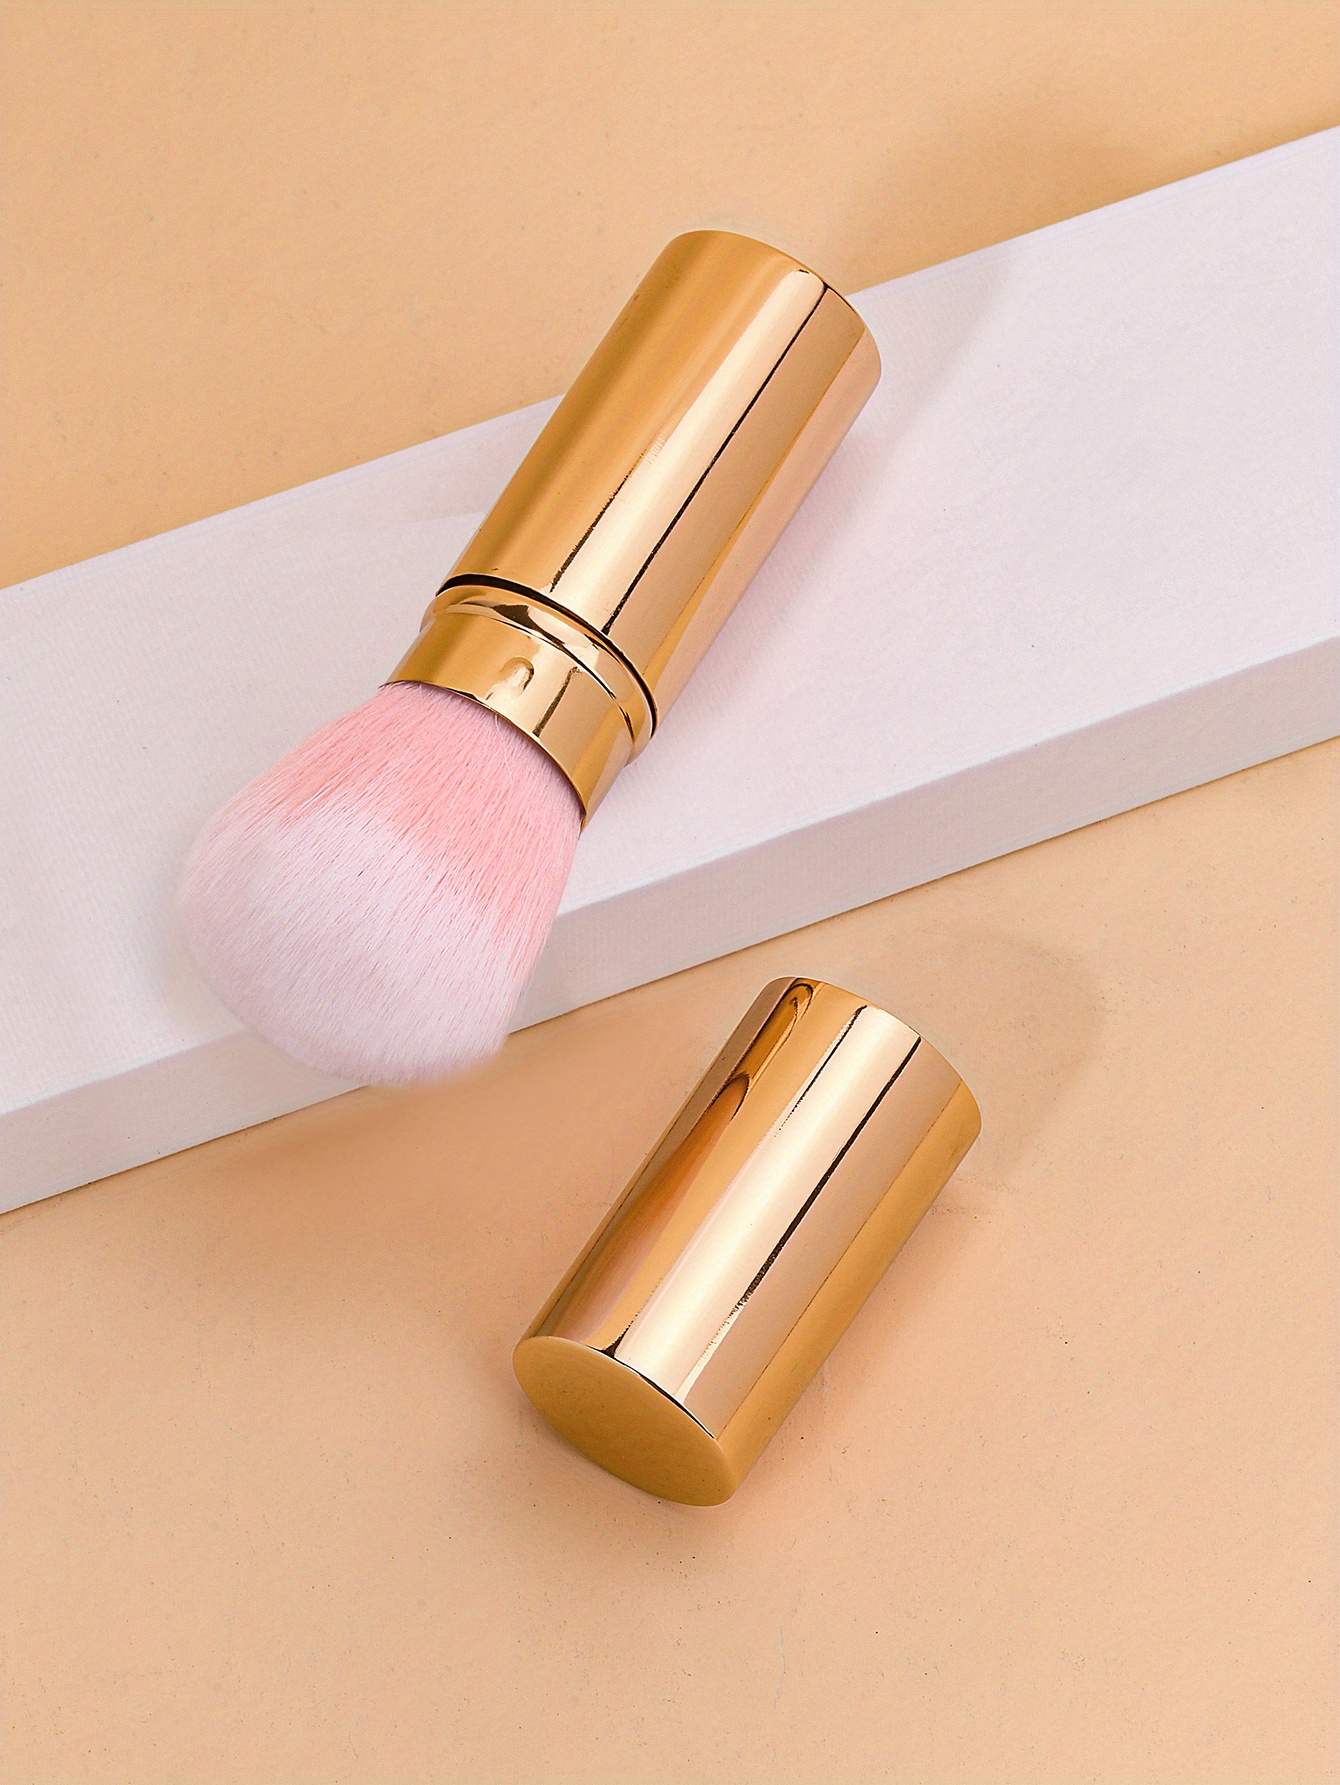 Rose Gold Mini Soft Powder Brush Portable Travel Foundation Brush For  Blushroom, Flat And Round Heads Cute Cosmetic Tool HHA 315 From Top_health,  $2.72